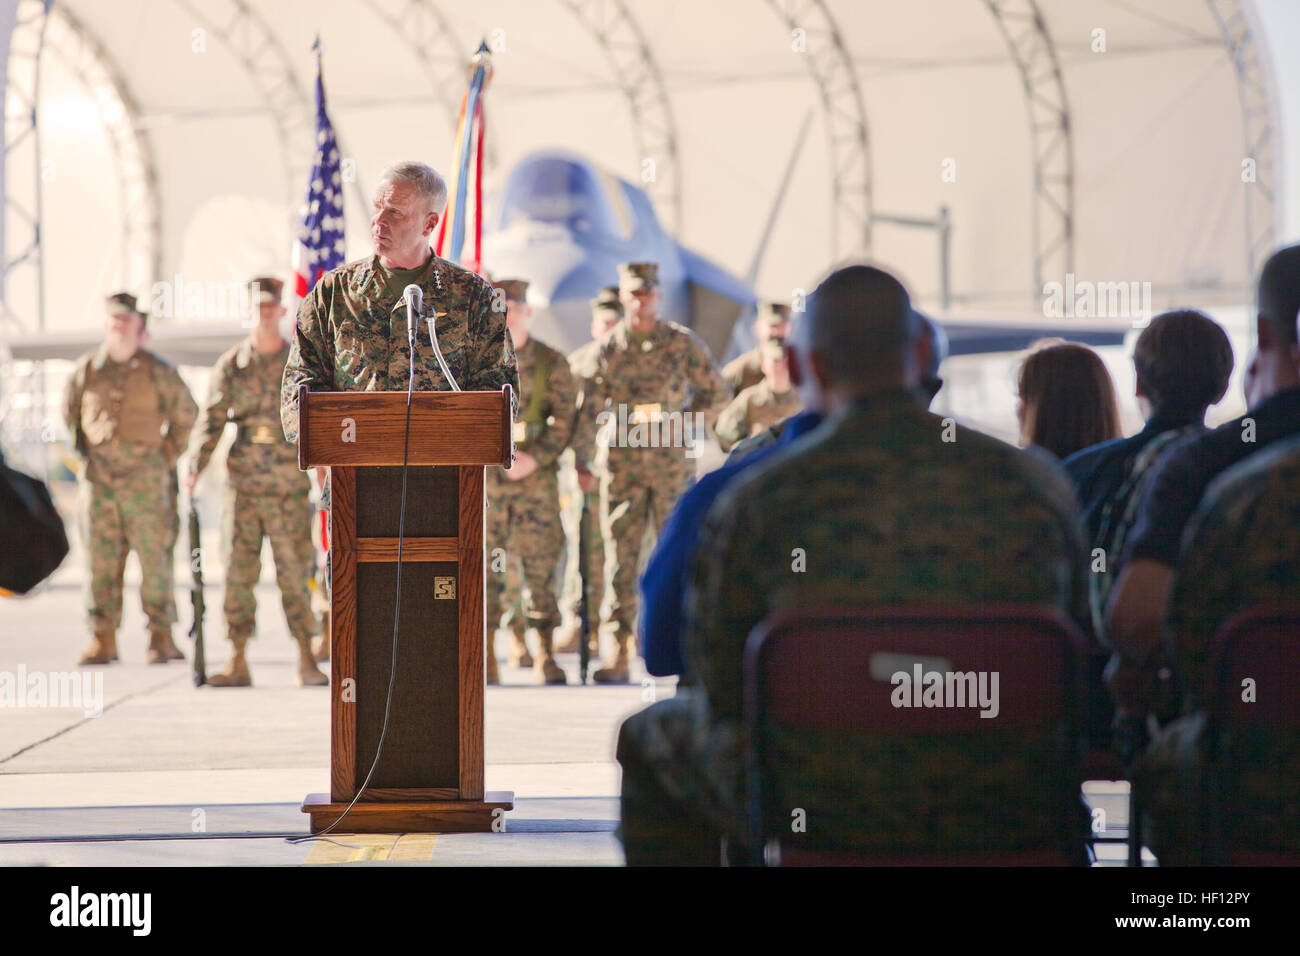 Gen. James Amos, Commandant of the Marine Corps, speaks of the importance of the F-35B to the Marine Corps and the Department of Defense during the re-designation ceremony of Marine Fighter Attack Squadron 121, at Marine Corps Air Station Yuma, Nov. 20.  VMFA-121 is an important milestone for the Marine Corps and the Department of Defense as the F-35 expands from a testing and training aircraft towards full-scale tactical aviation operations.  The quick sortie turnaround of the Marine Corps' aircraft forward, expeditionary airfields with shorter runways has changed the tempo of battle in our f Stock Photo